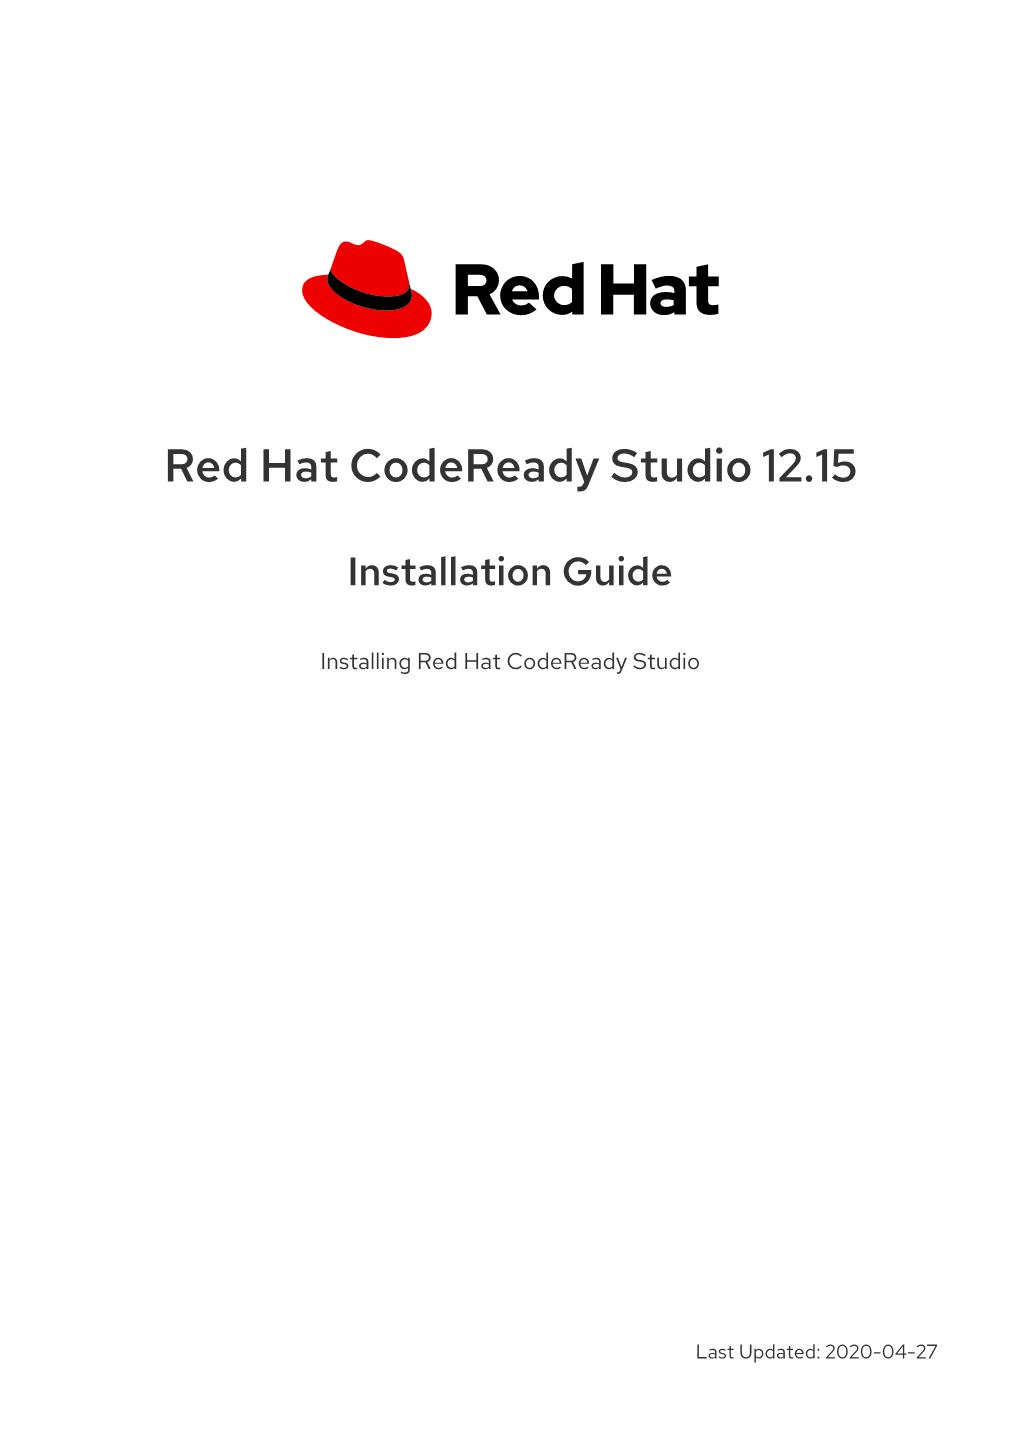 Red Hat Codeready Studio 12.15 Installation Guide